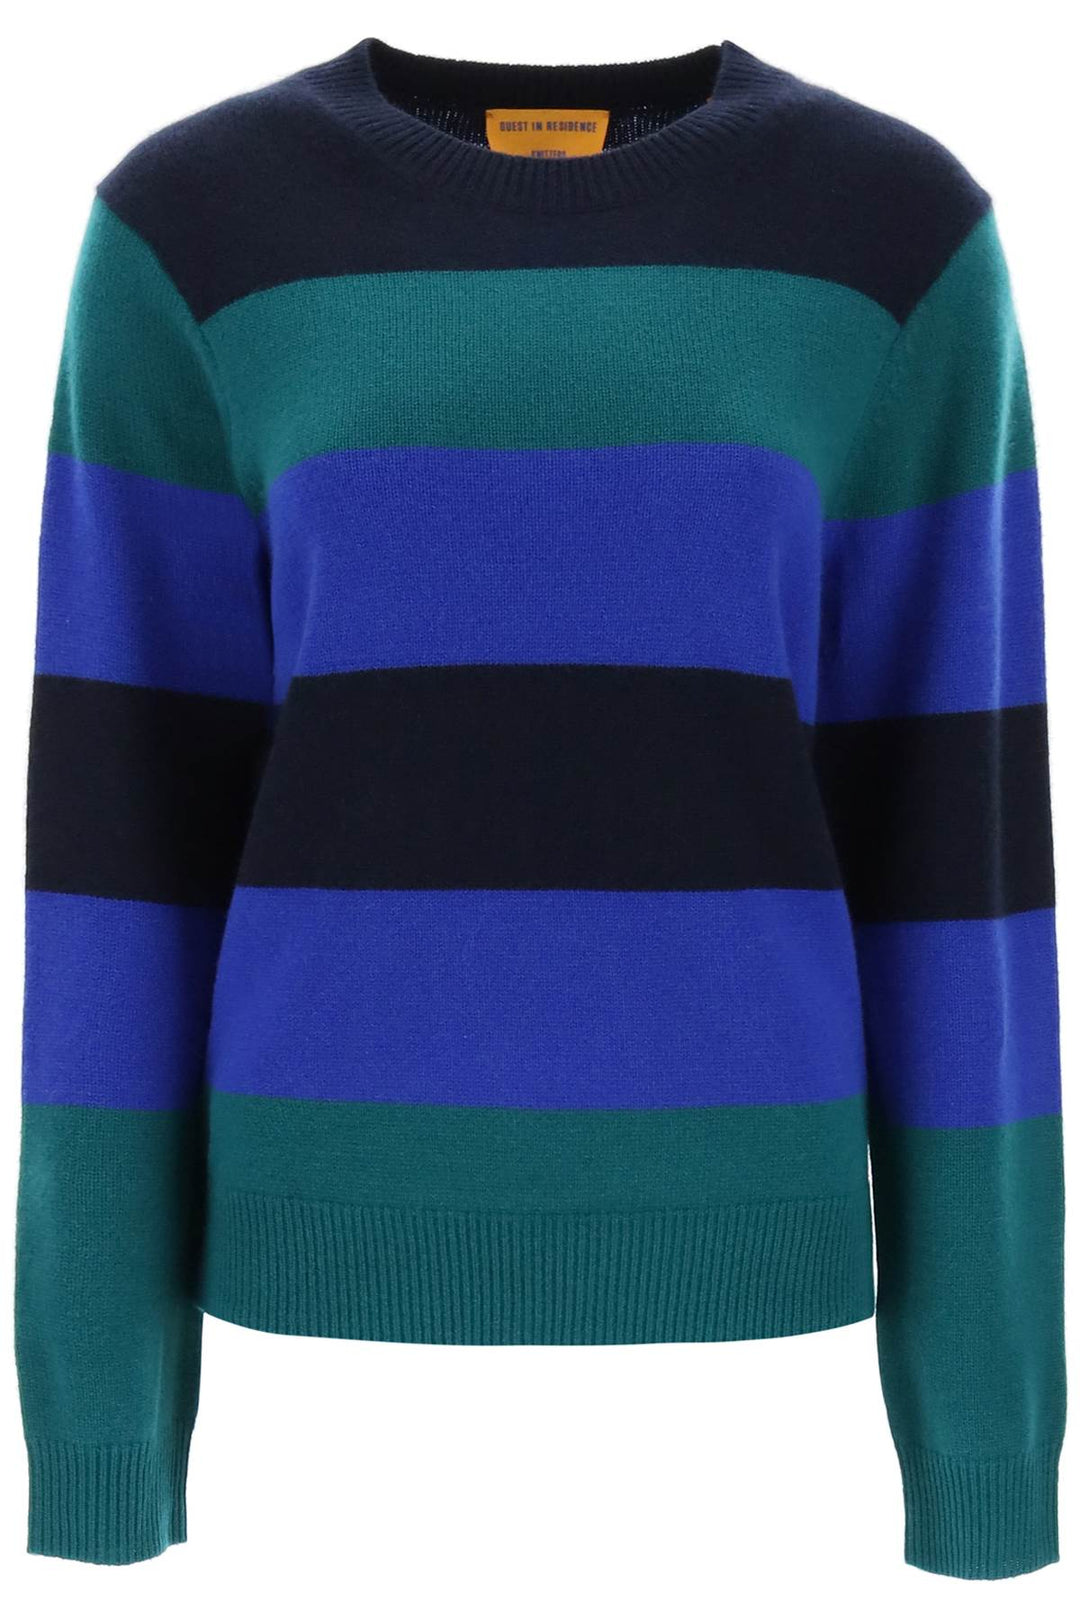 Guest In Residence Striped Cashmere Sweater   Verde